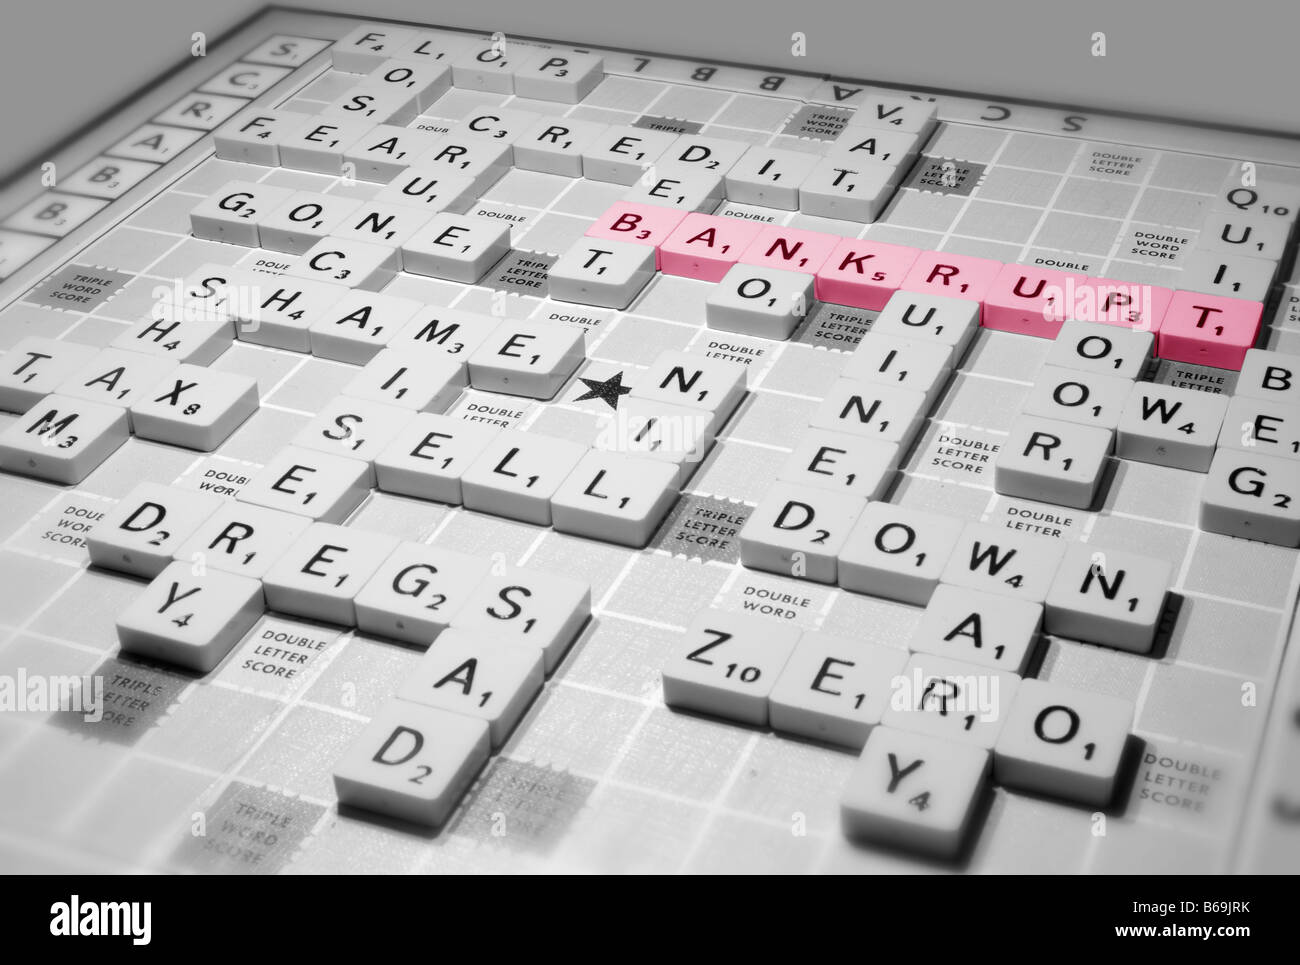 A scrabble game highlights global recession issues of the credit crunch and other financial implications Stock Photo